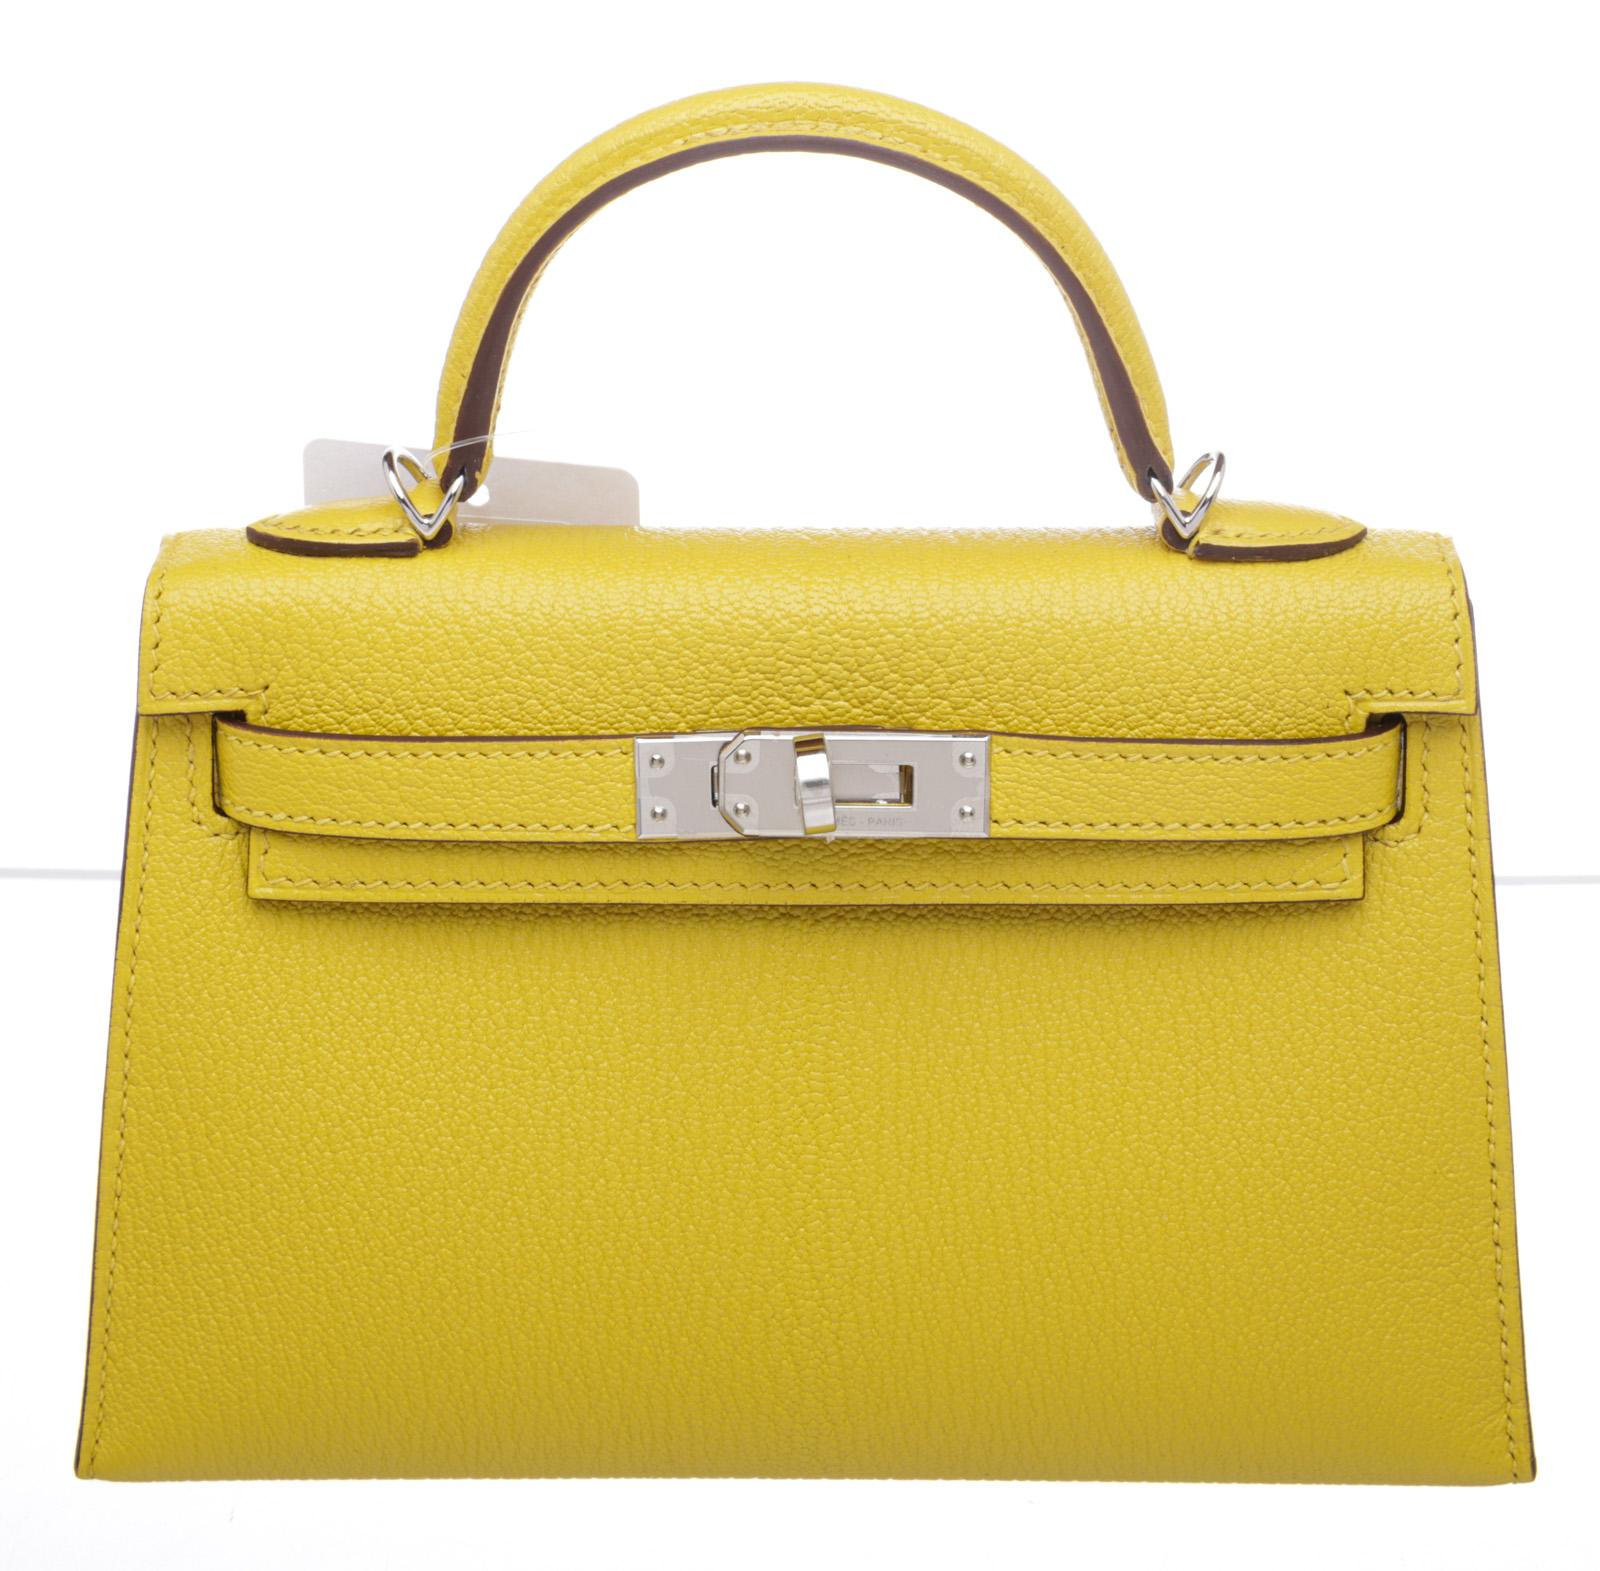 100% Authentic 

Sometimes you just need to be your own ray of sunshine. Crafted from Chevre leather in a bright yellow hue, this Kelly 20 2Way bag from Hermes will brighten up even the darkest of days. Rise and shine. The Kelly features a single